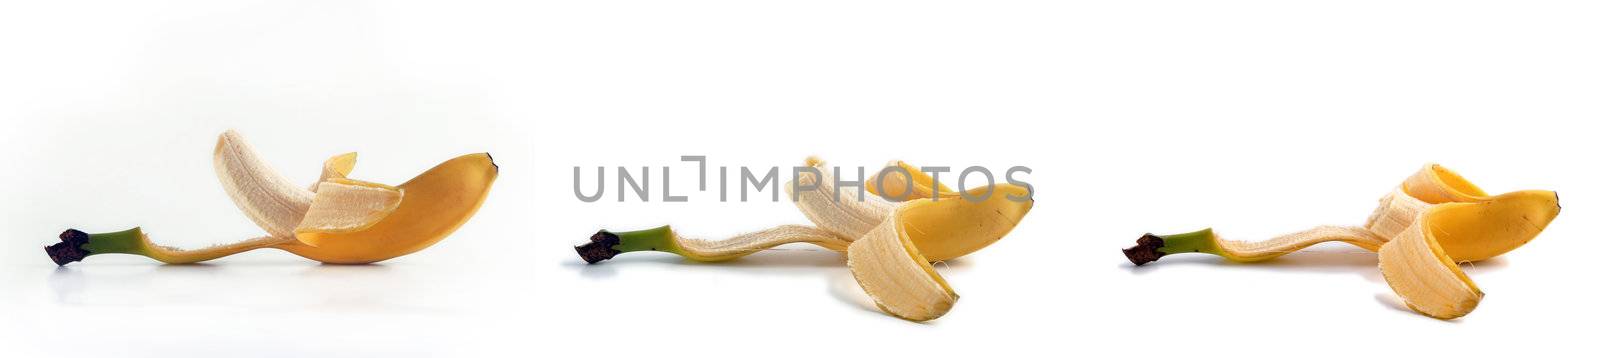 Sequence of a banana in three stages of bite.  by cienpies